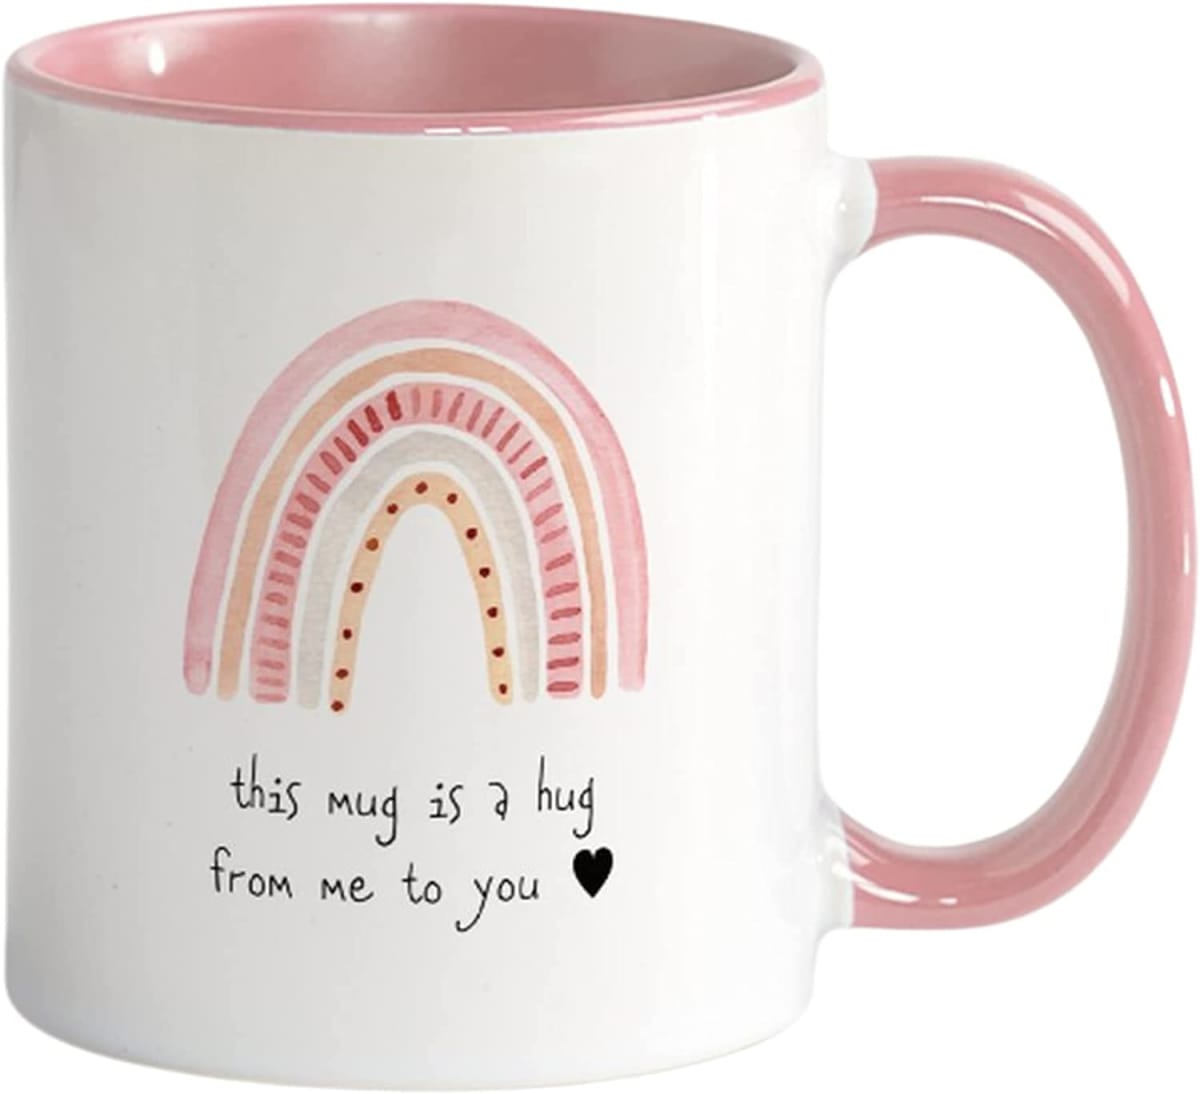 UnBoxMe Mug Gift With Quote